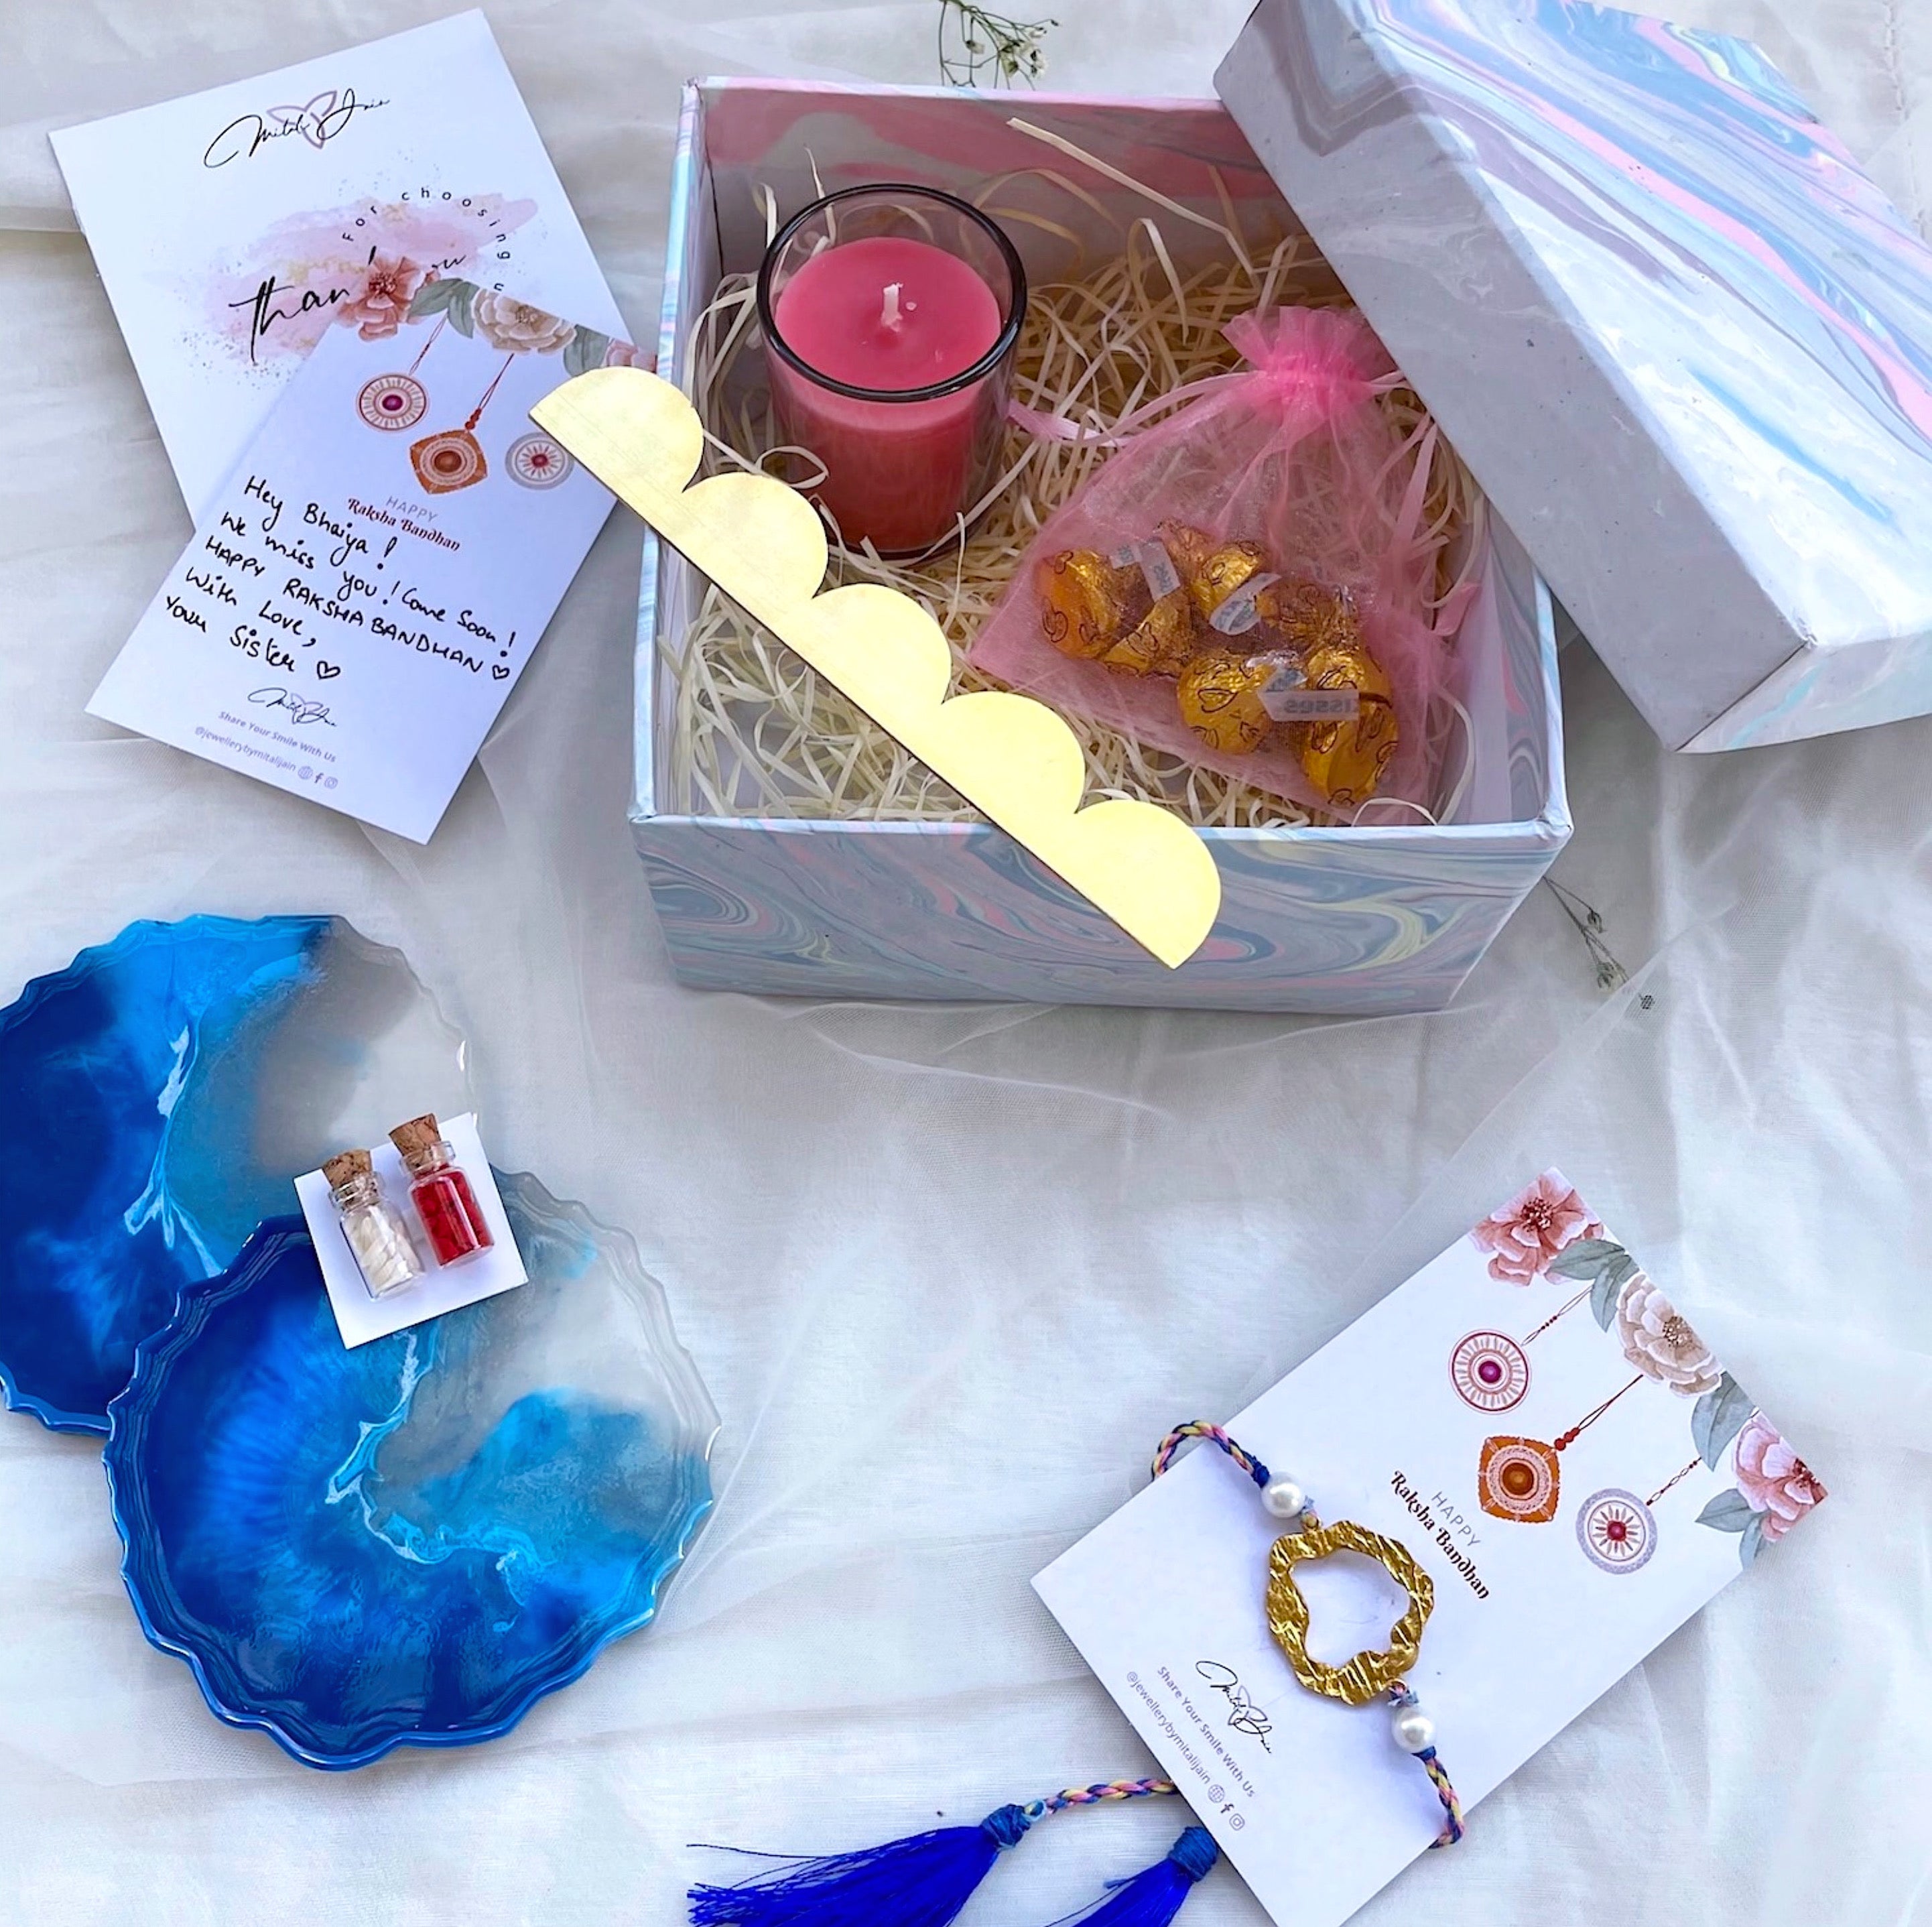 Unique & Creative Rakhi Gifts Ideas for Your Married Sister and Brother